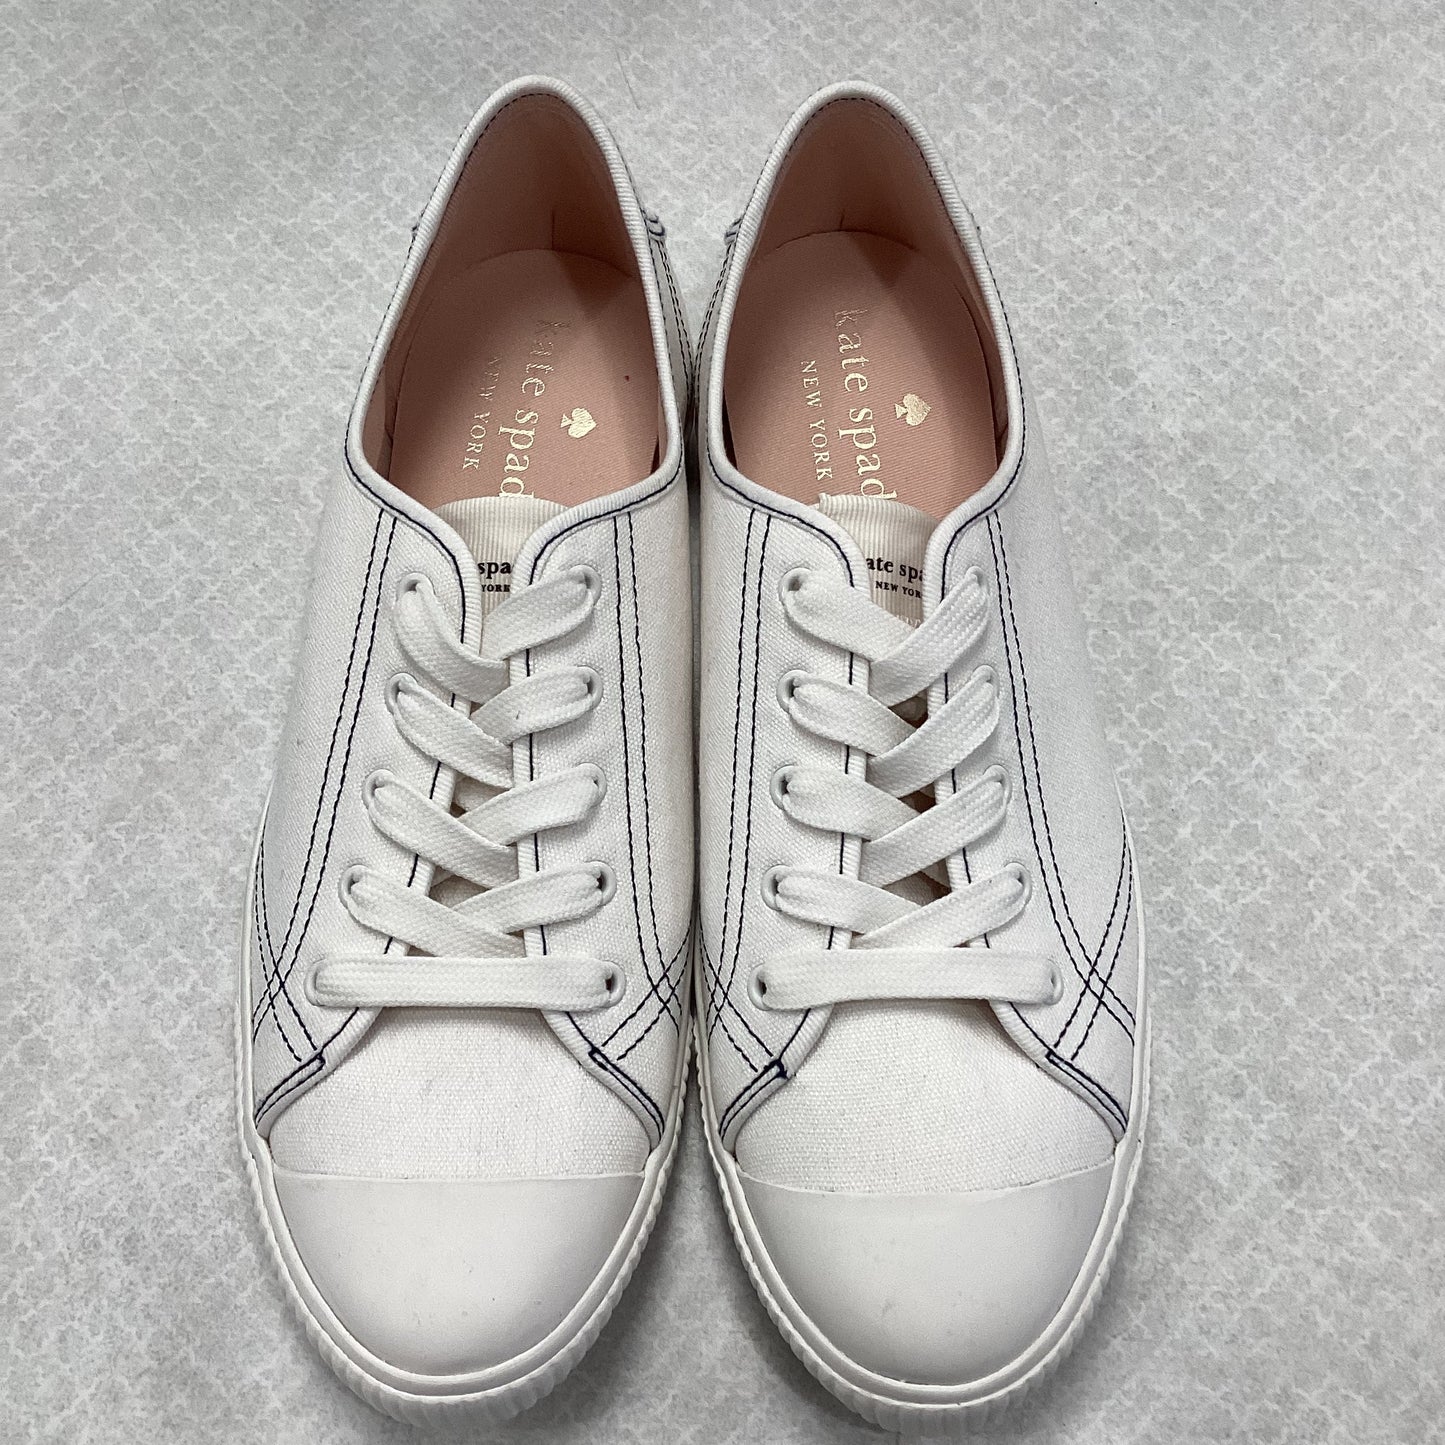 Shoes Sneakers By Kate Spade  Size: 10